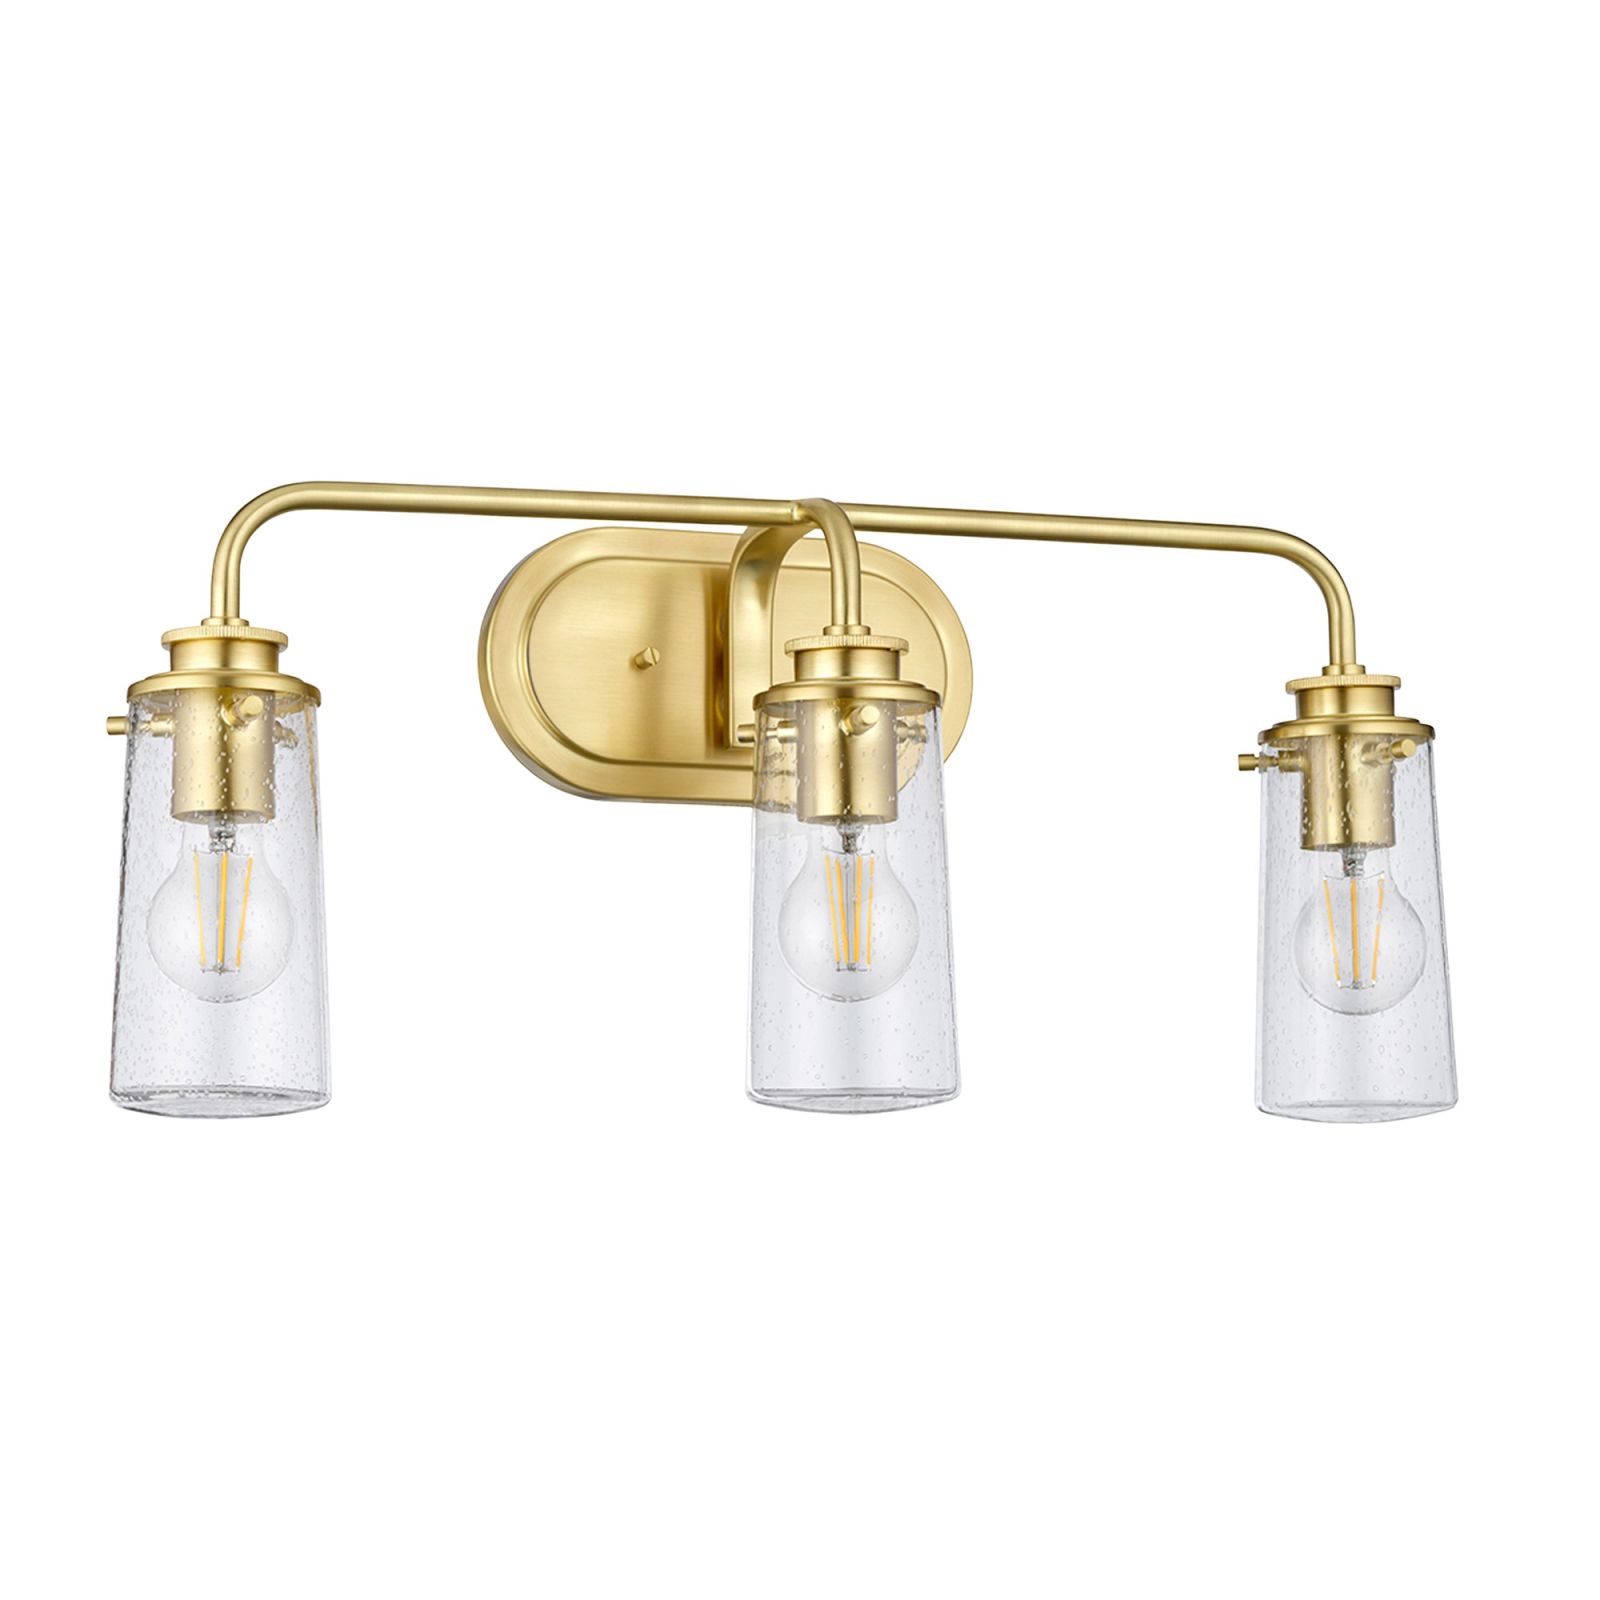 Bray Three Light Bathroom Wall Light in a choice of Brushed Brass or Chrome